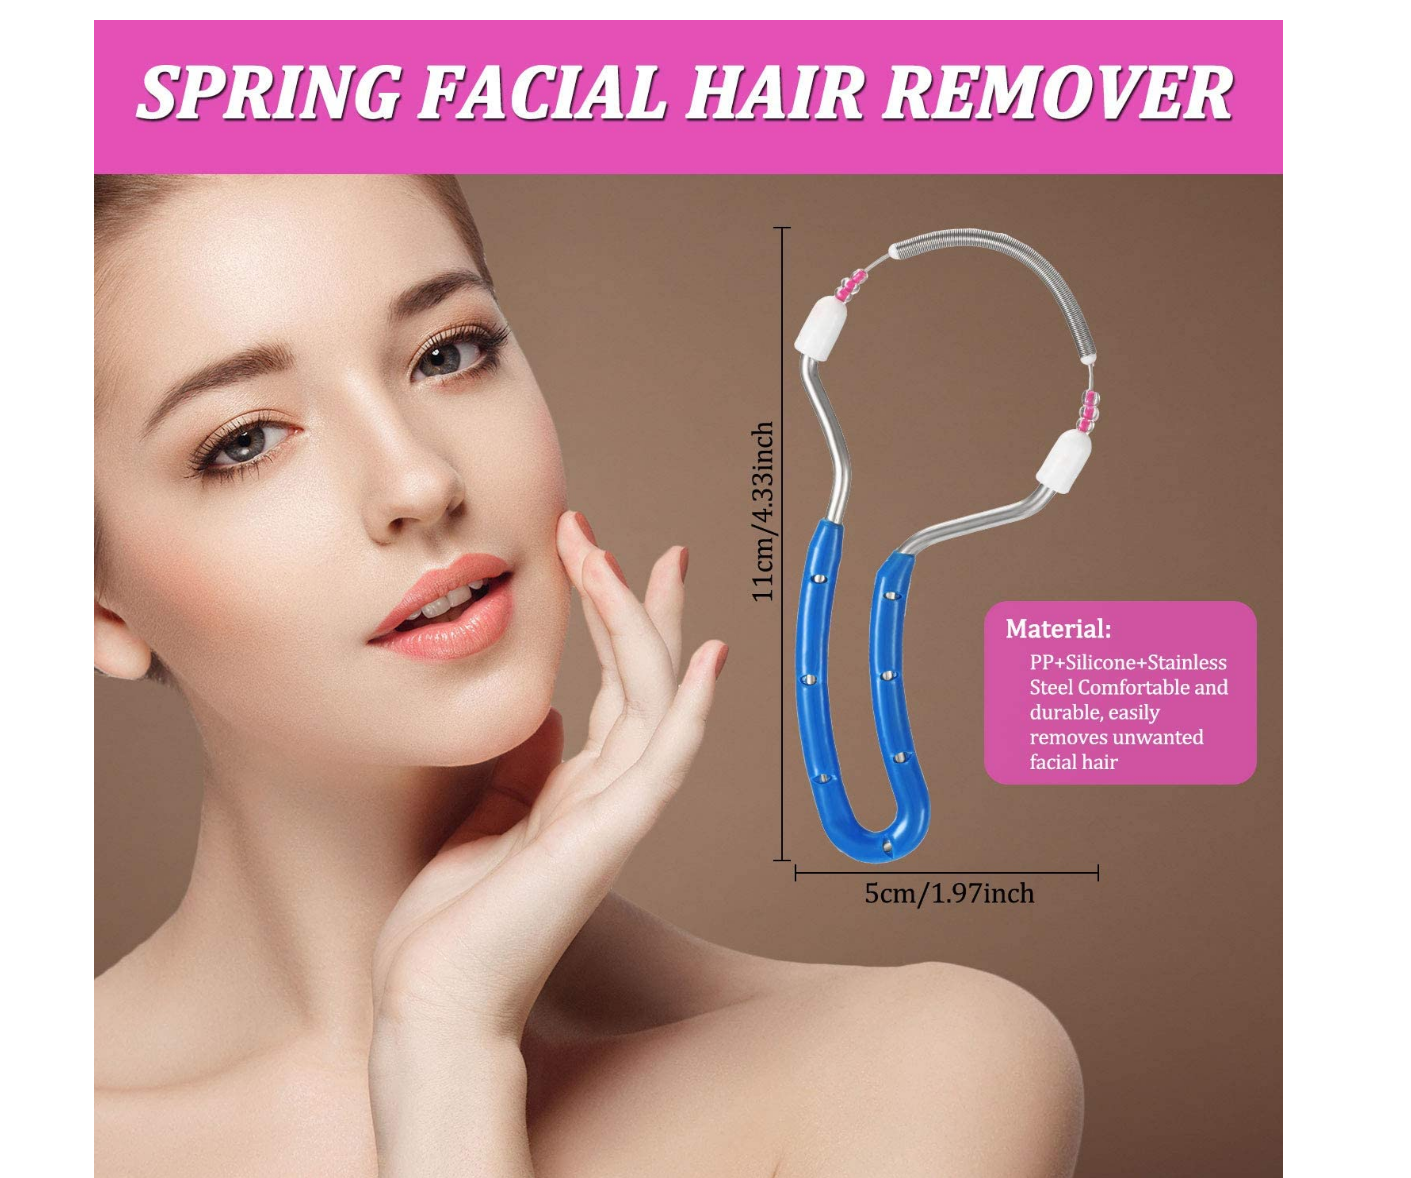 2 Pieces Spring Facial Hair Remover Manual Epilator Spring Face Hair Roller  Threading Epilator Tools for Face Hair Removing Supply |TospinoMall online  shopping platform in GhanaTospinoMall Ghana online shopping